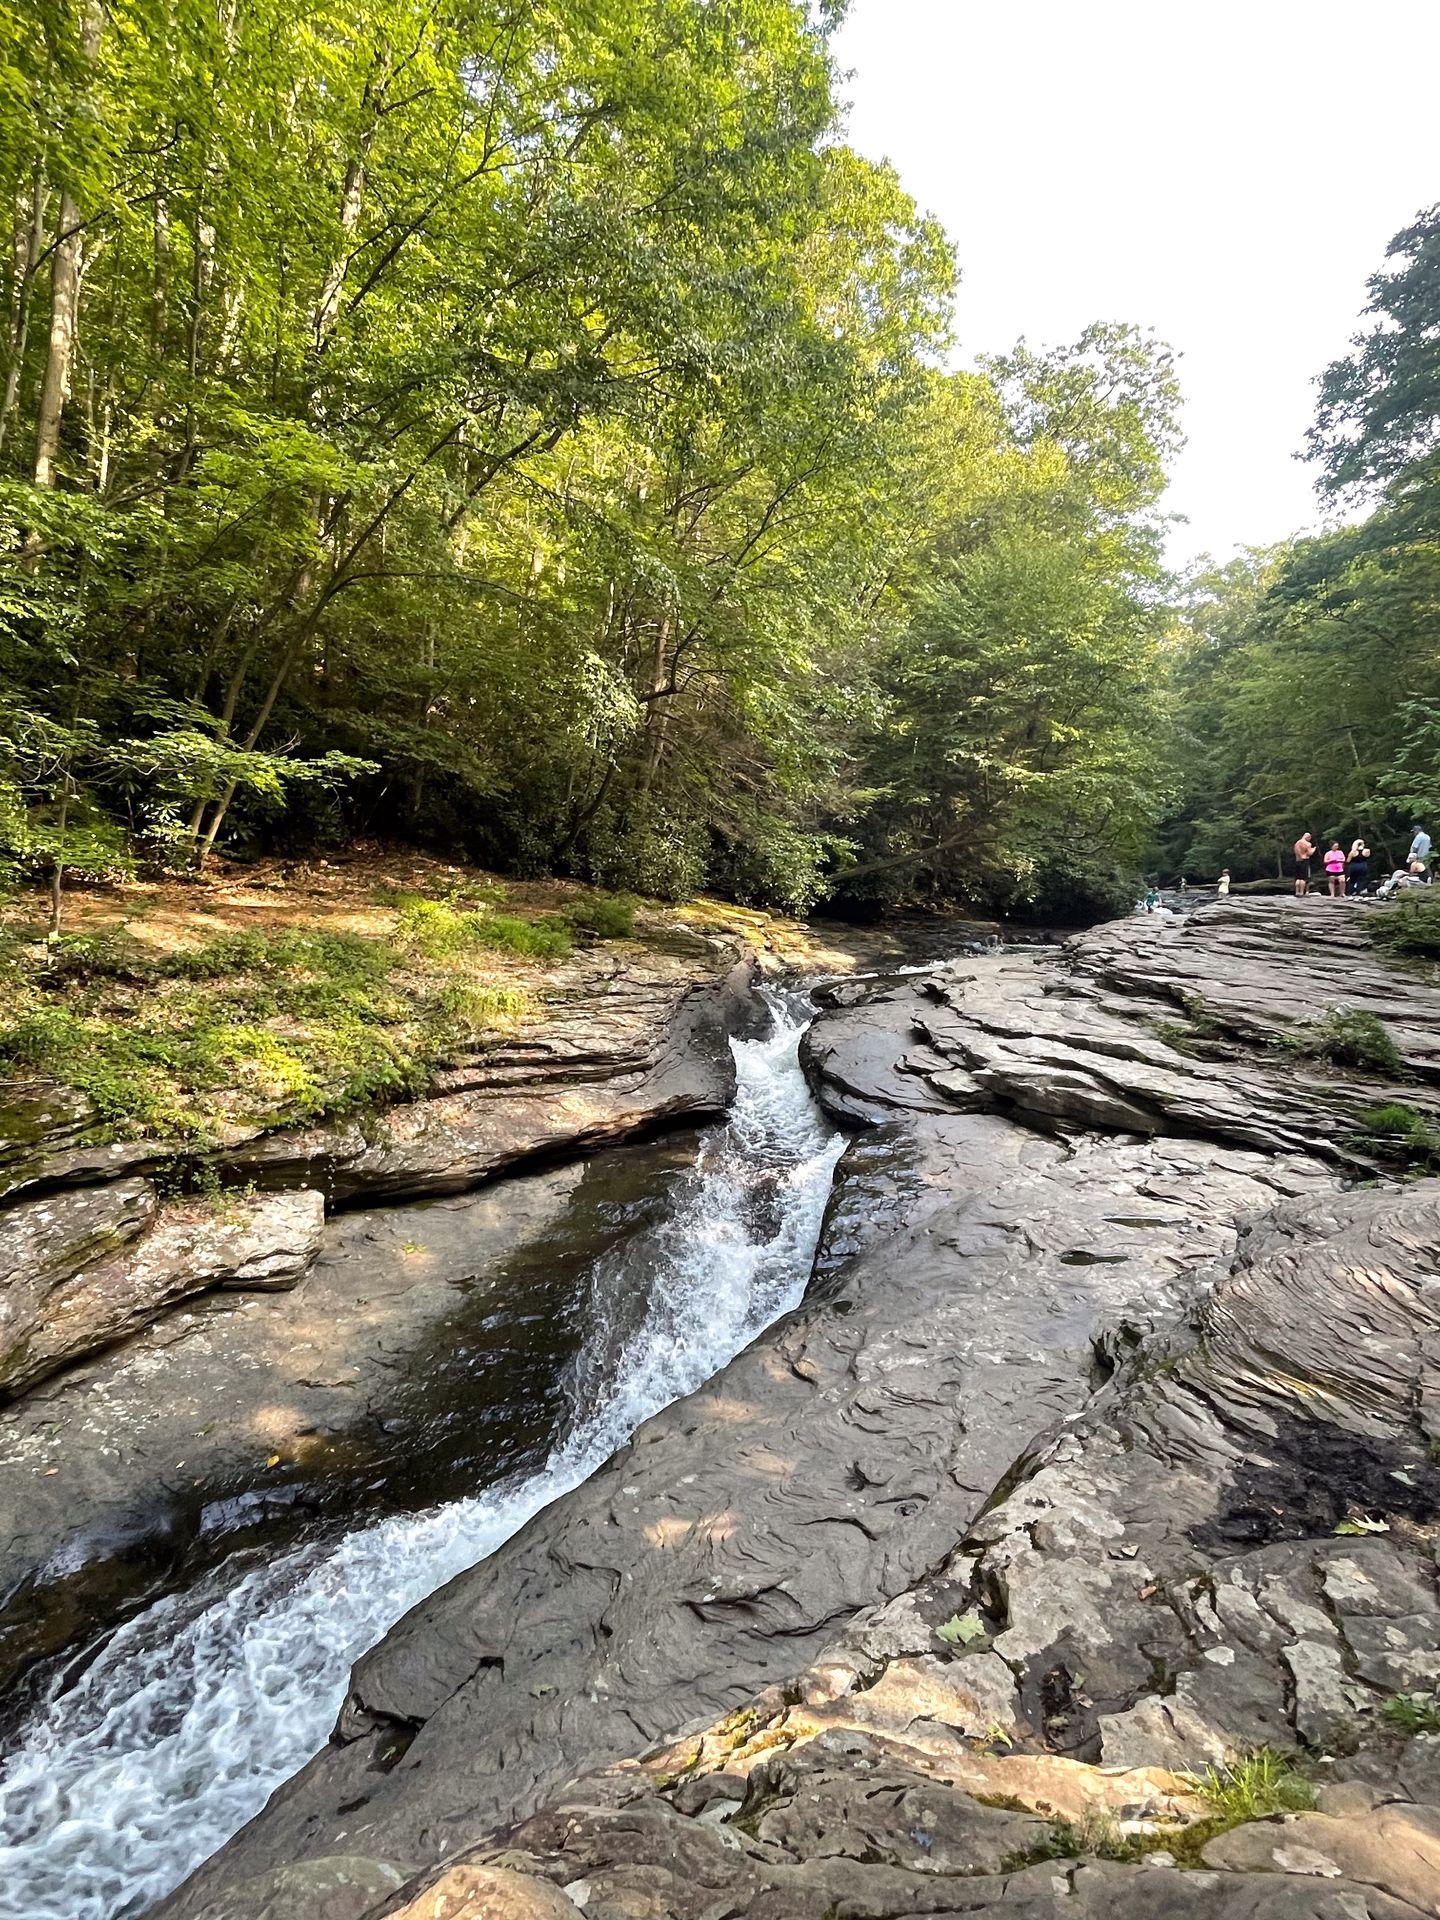 A narrow stream of water cascading through a rock face in Ohiopyle State Park.